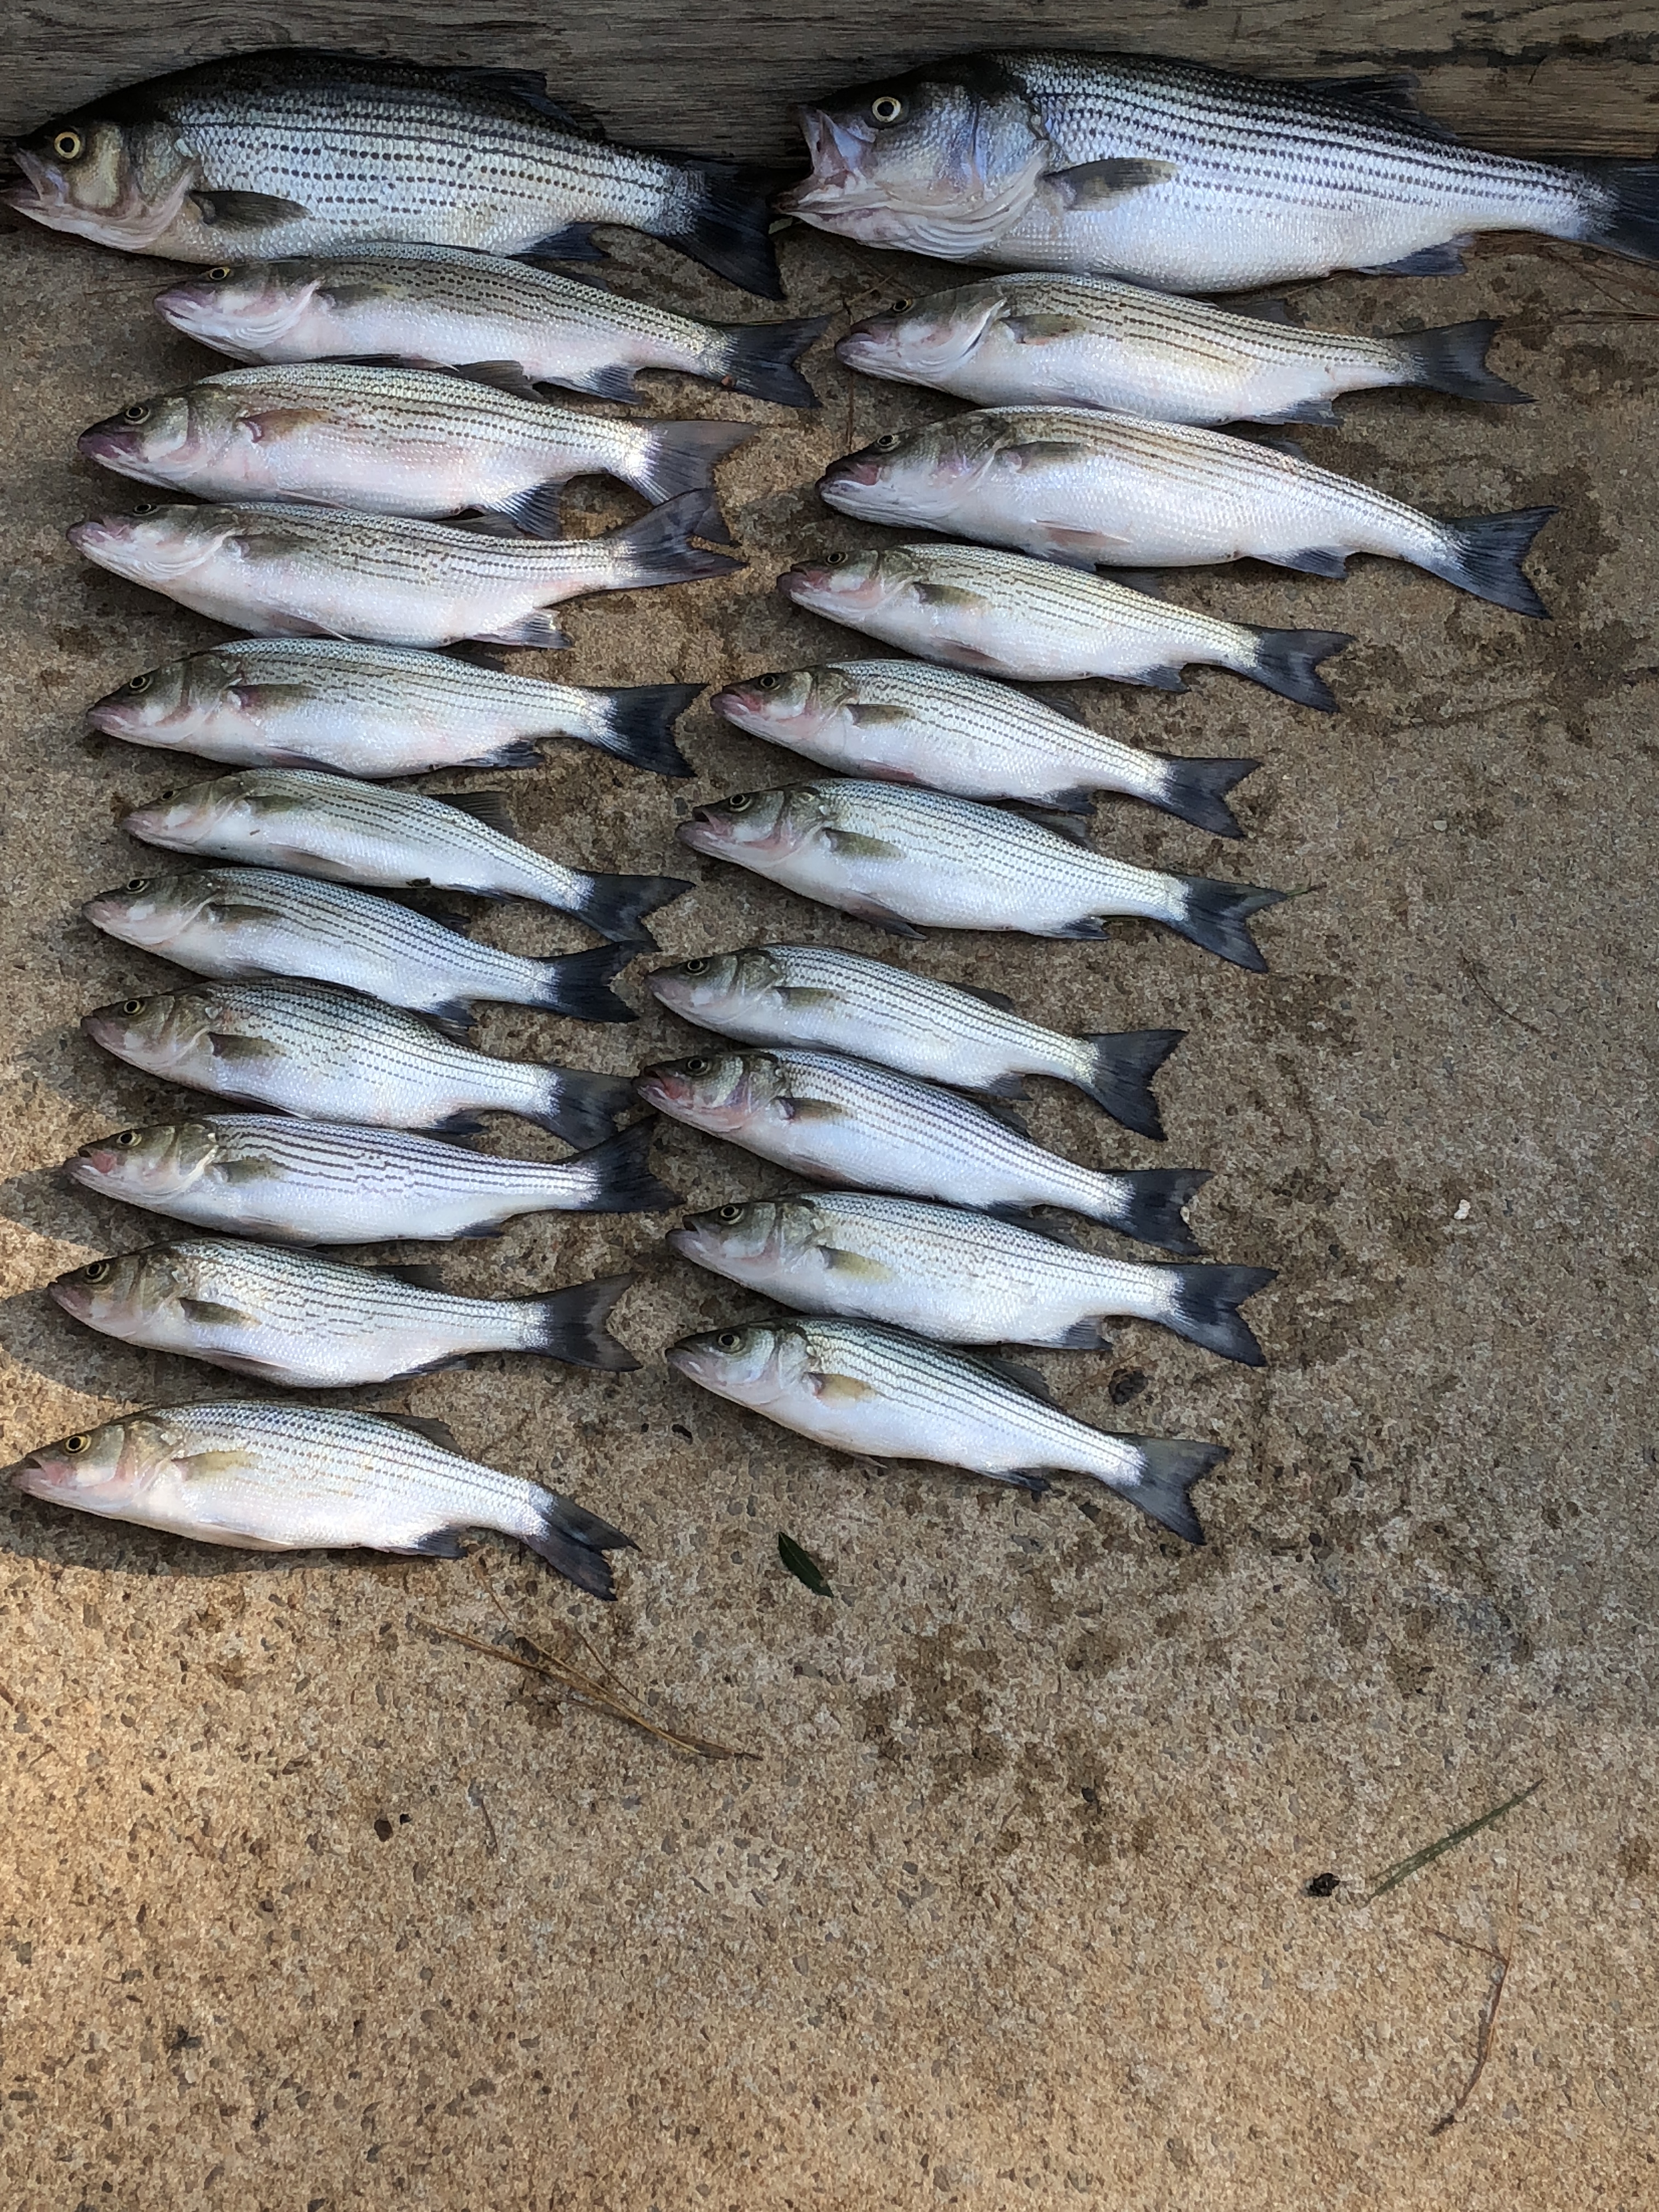 June 26, 2018 Great catch of stripers and  hybirds caught by my slients.IMG_2230